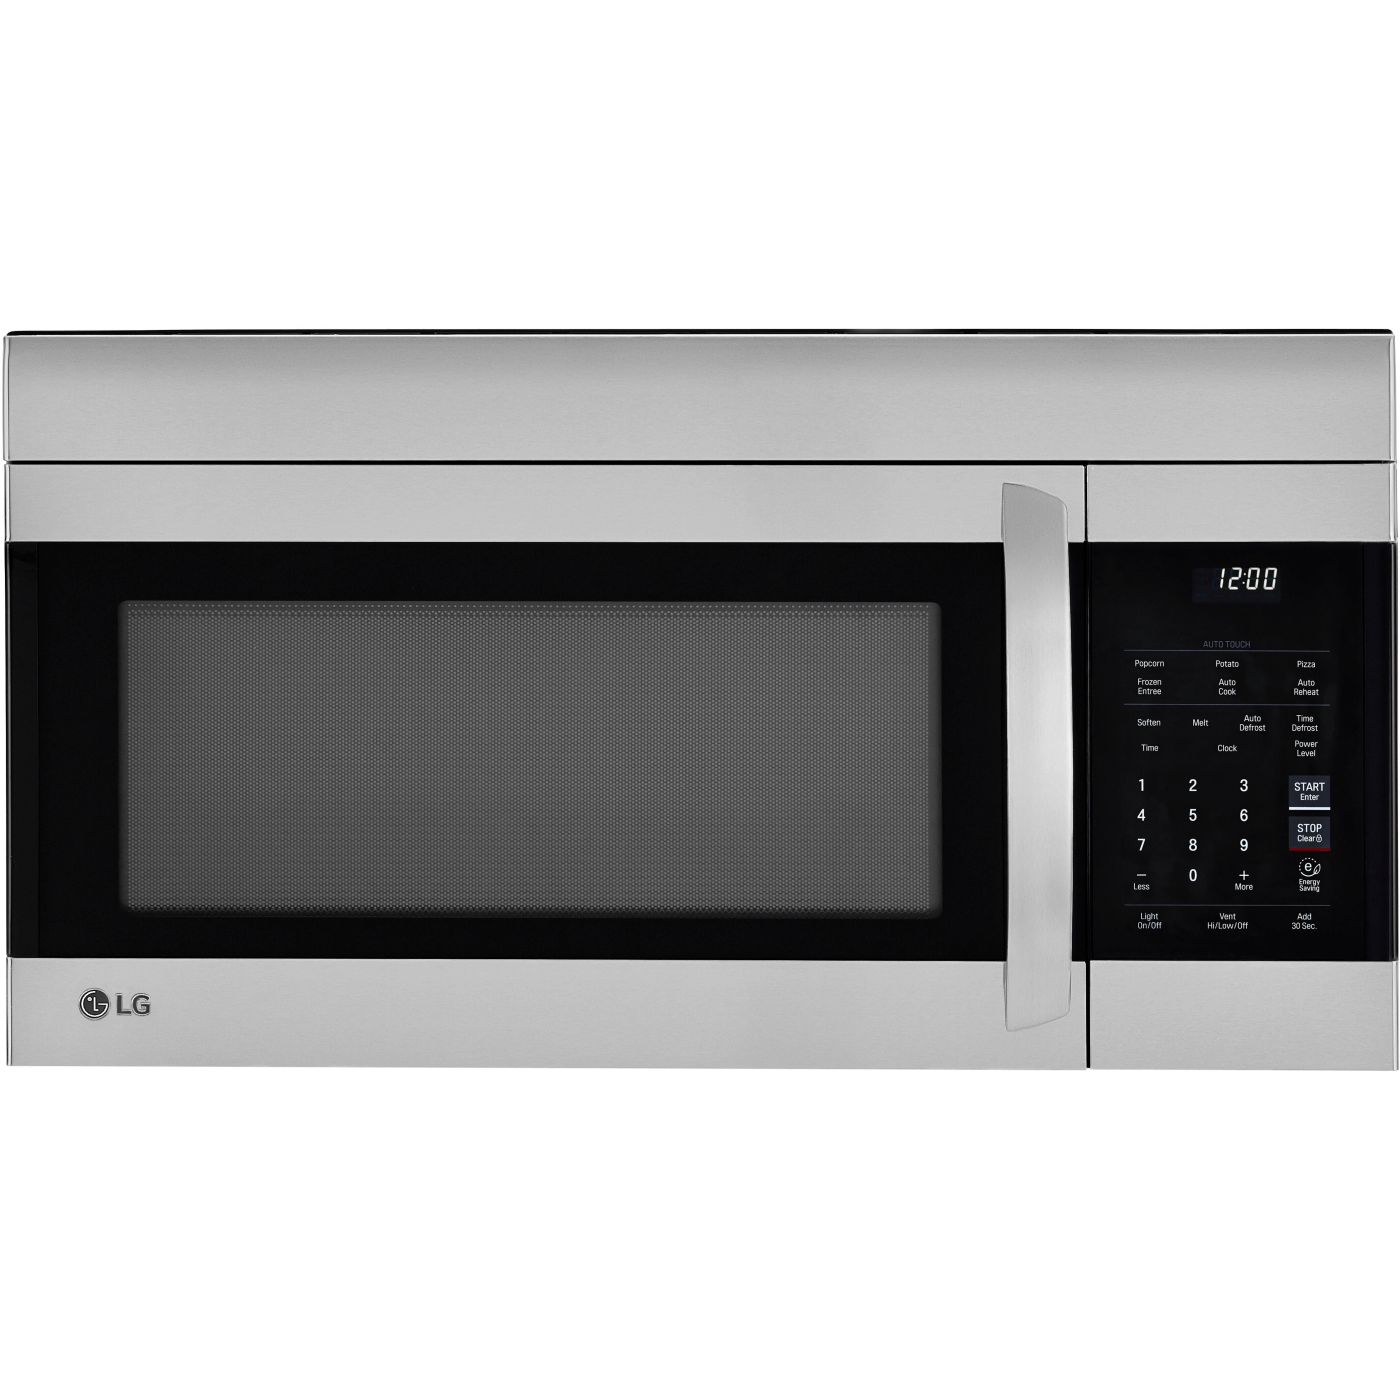 LG 1.7-Cu. Ft. 30 in. Over-the-Range Microwave Oven with Easy Clean in Stainless Steel - white background